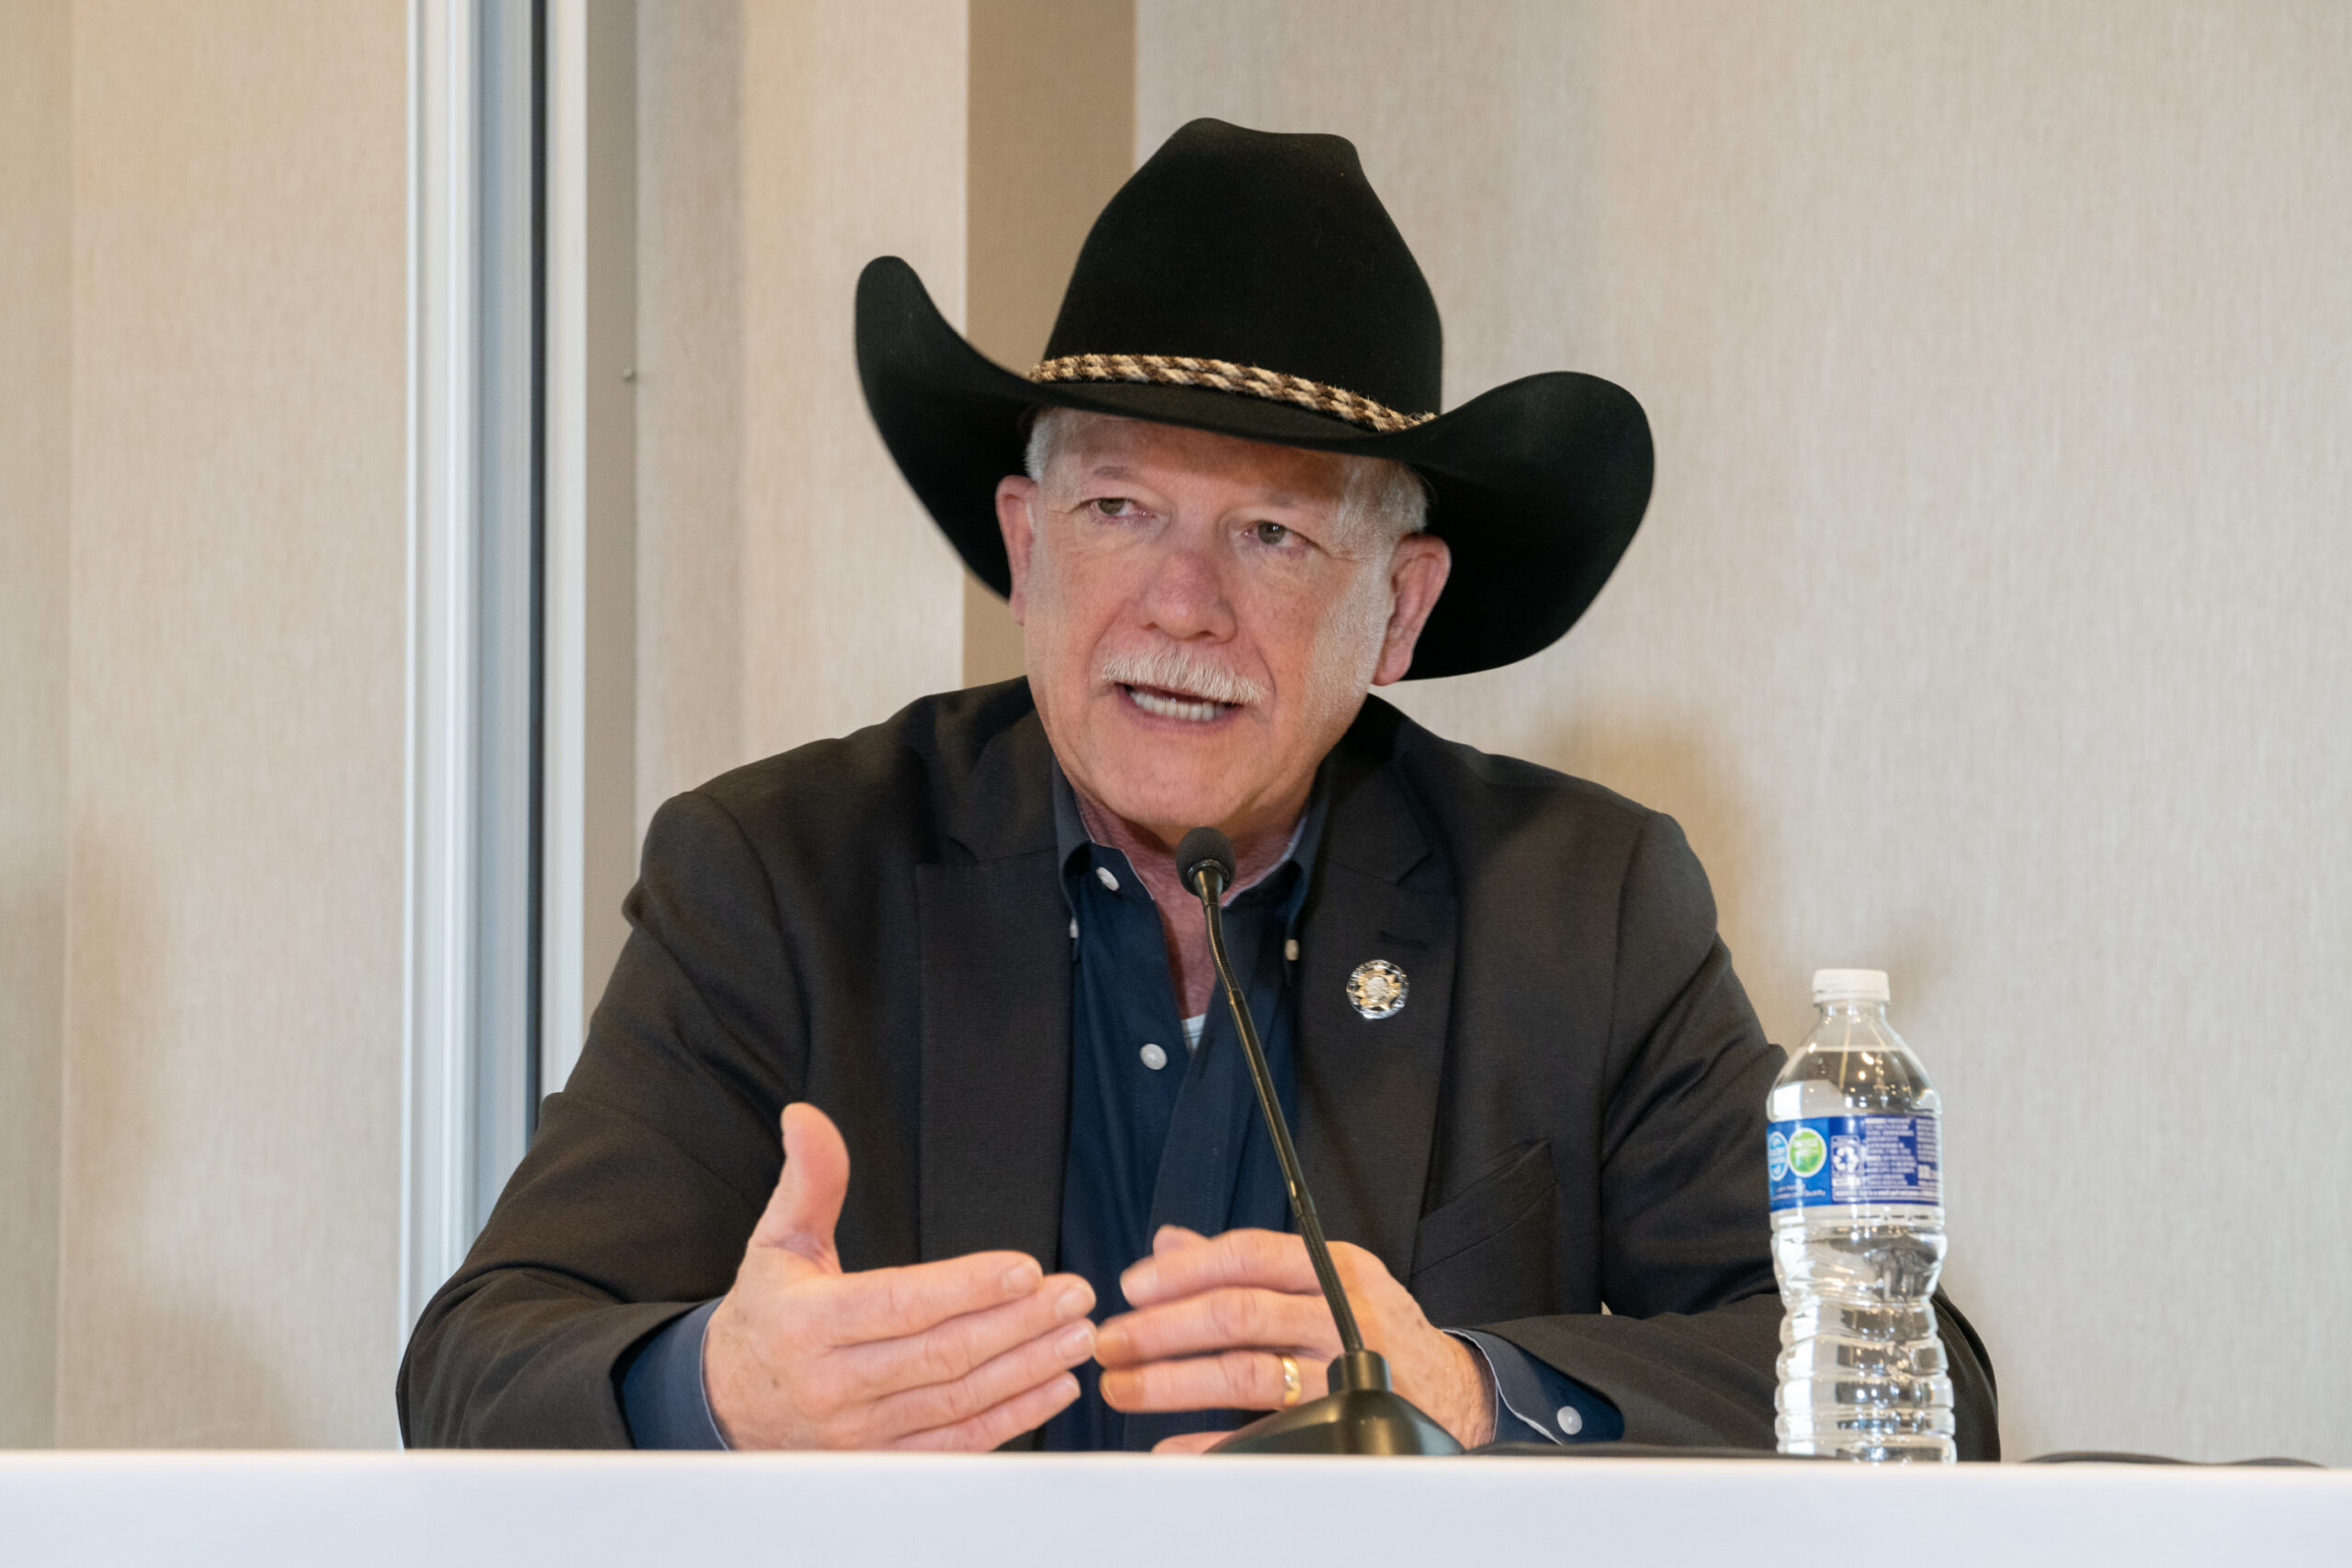 A white haired man in black with a black cowboy hat speaking into a microphone. A bottle of water is to his right.